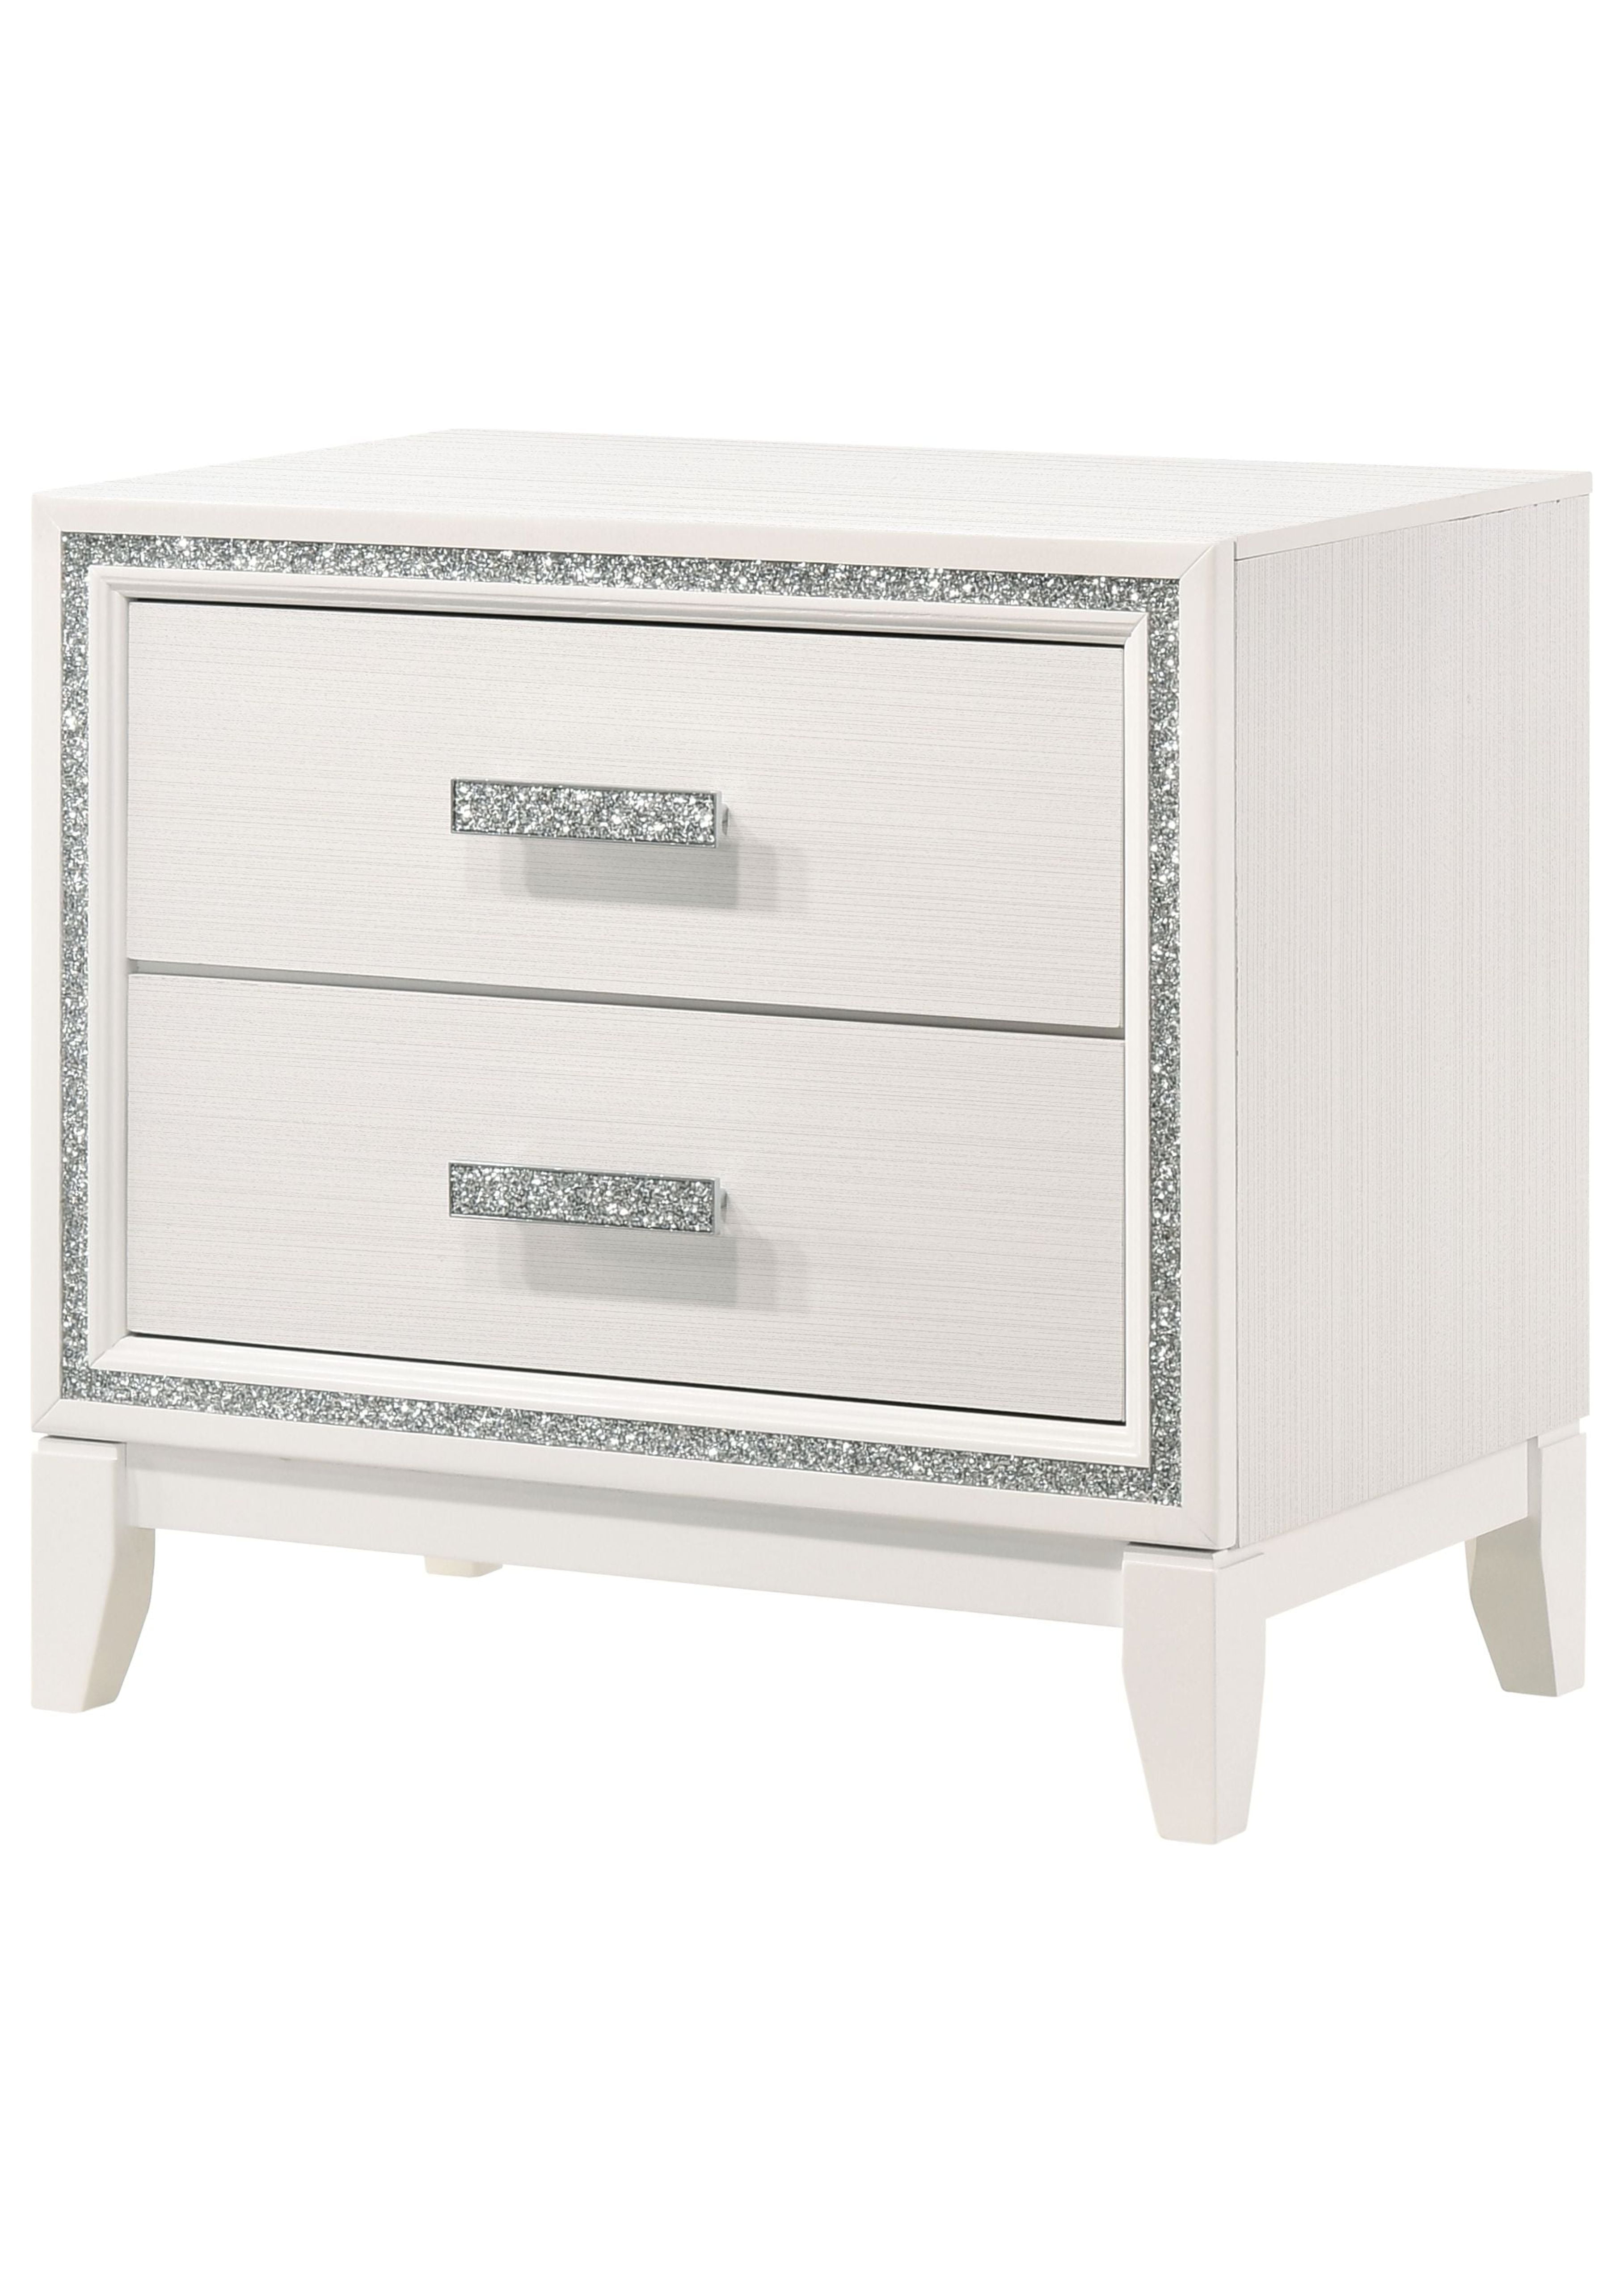 Picture of Acme Furniture 28453 28 x 17 x 26 in. Haiden Nightstand, White